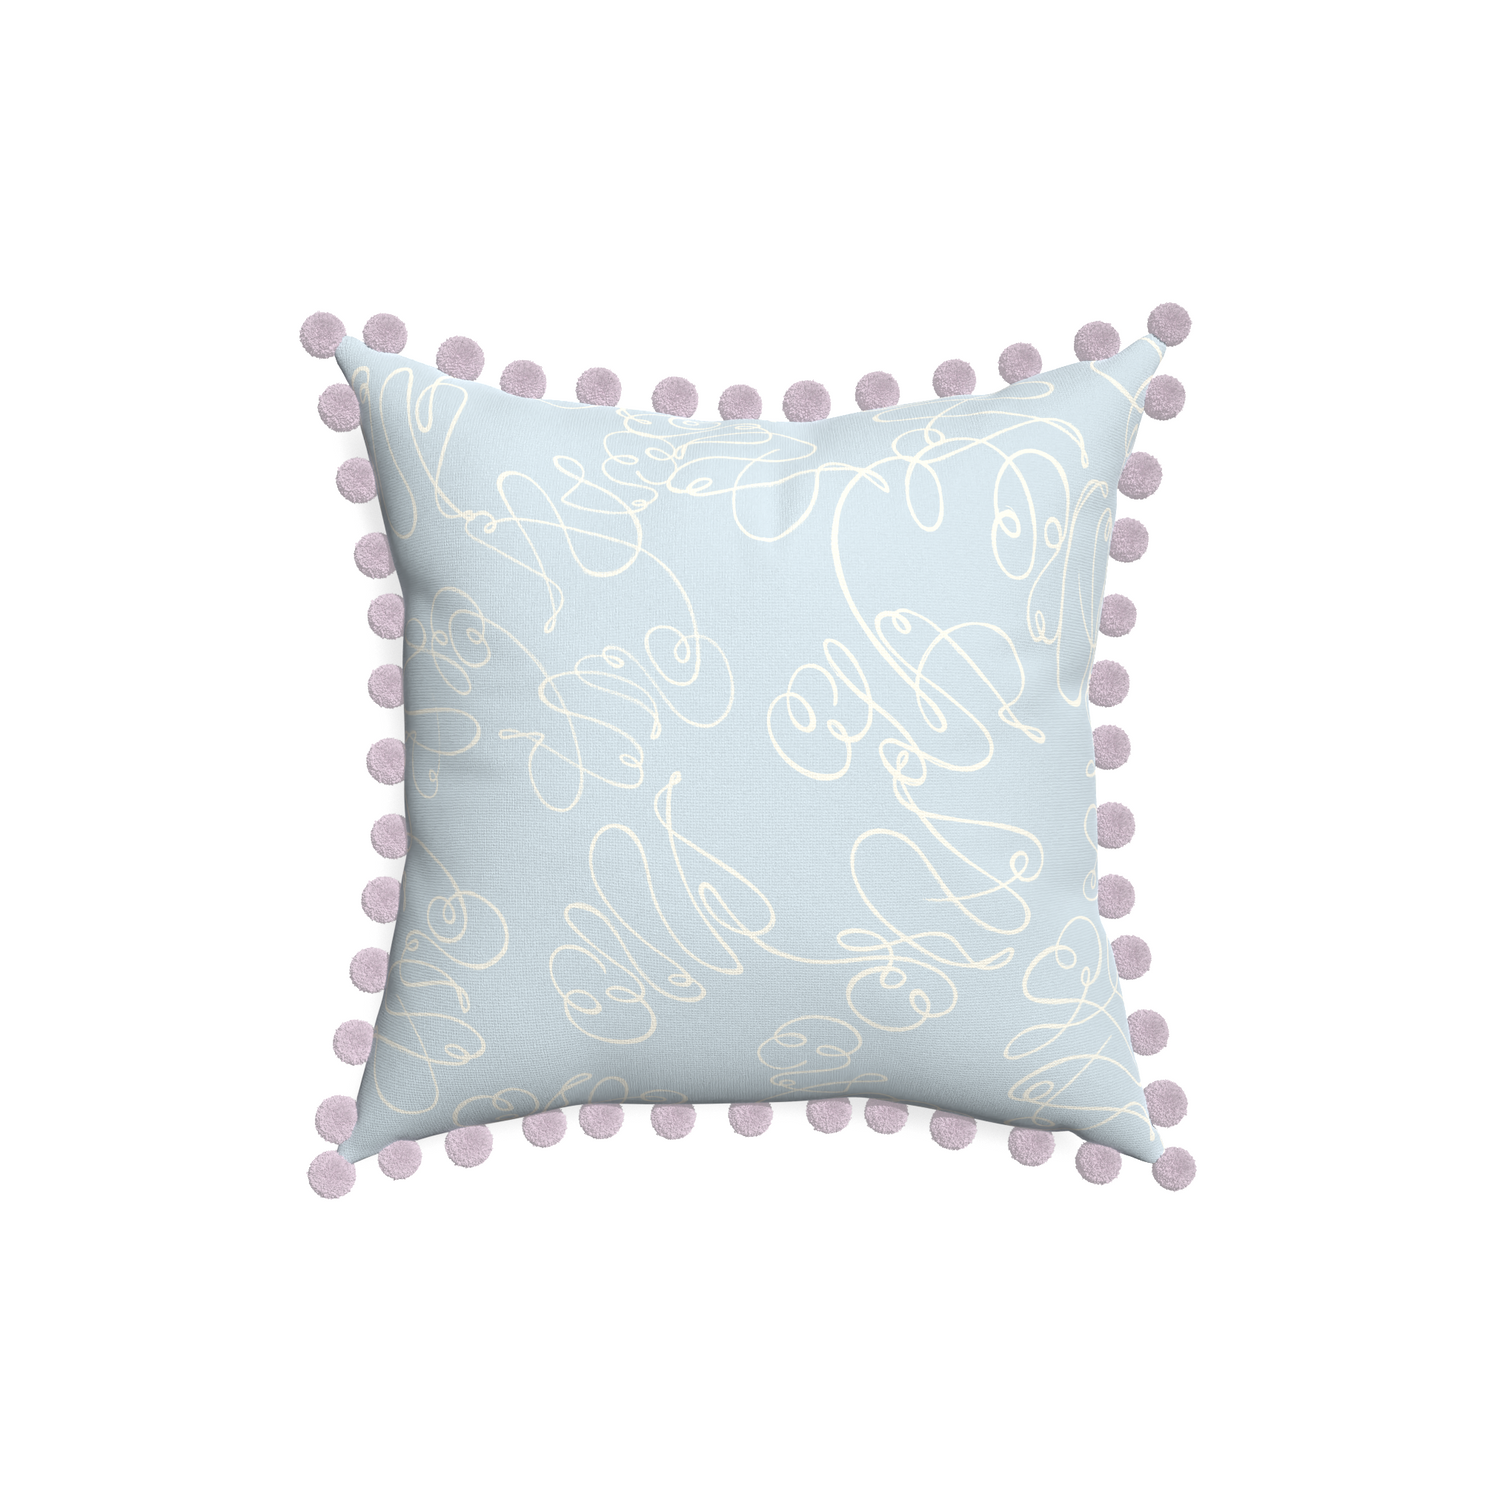 18-square mirabella custom powder blue abstractpillow with l on white background